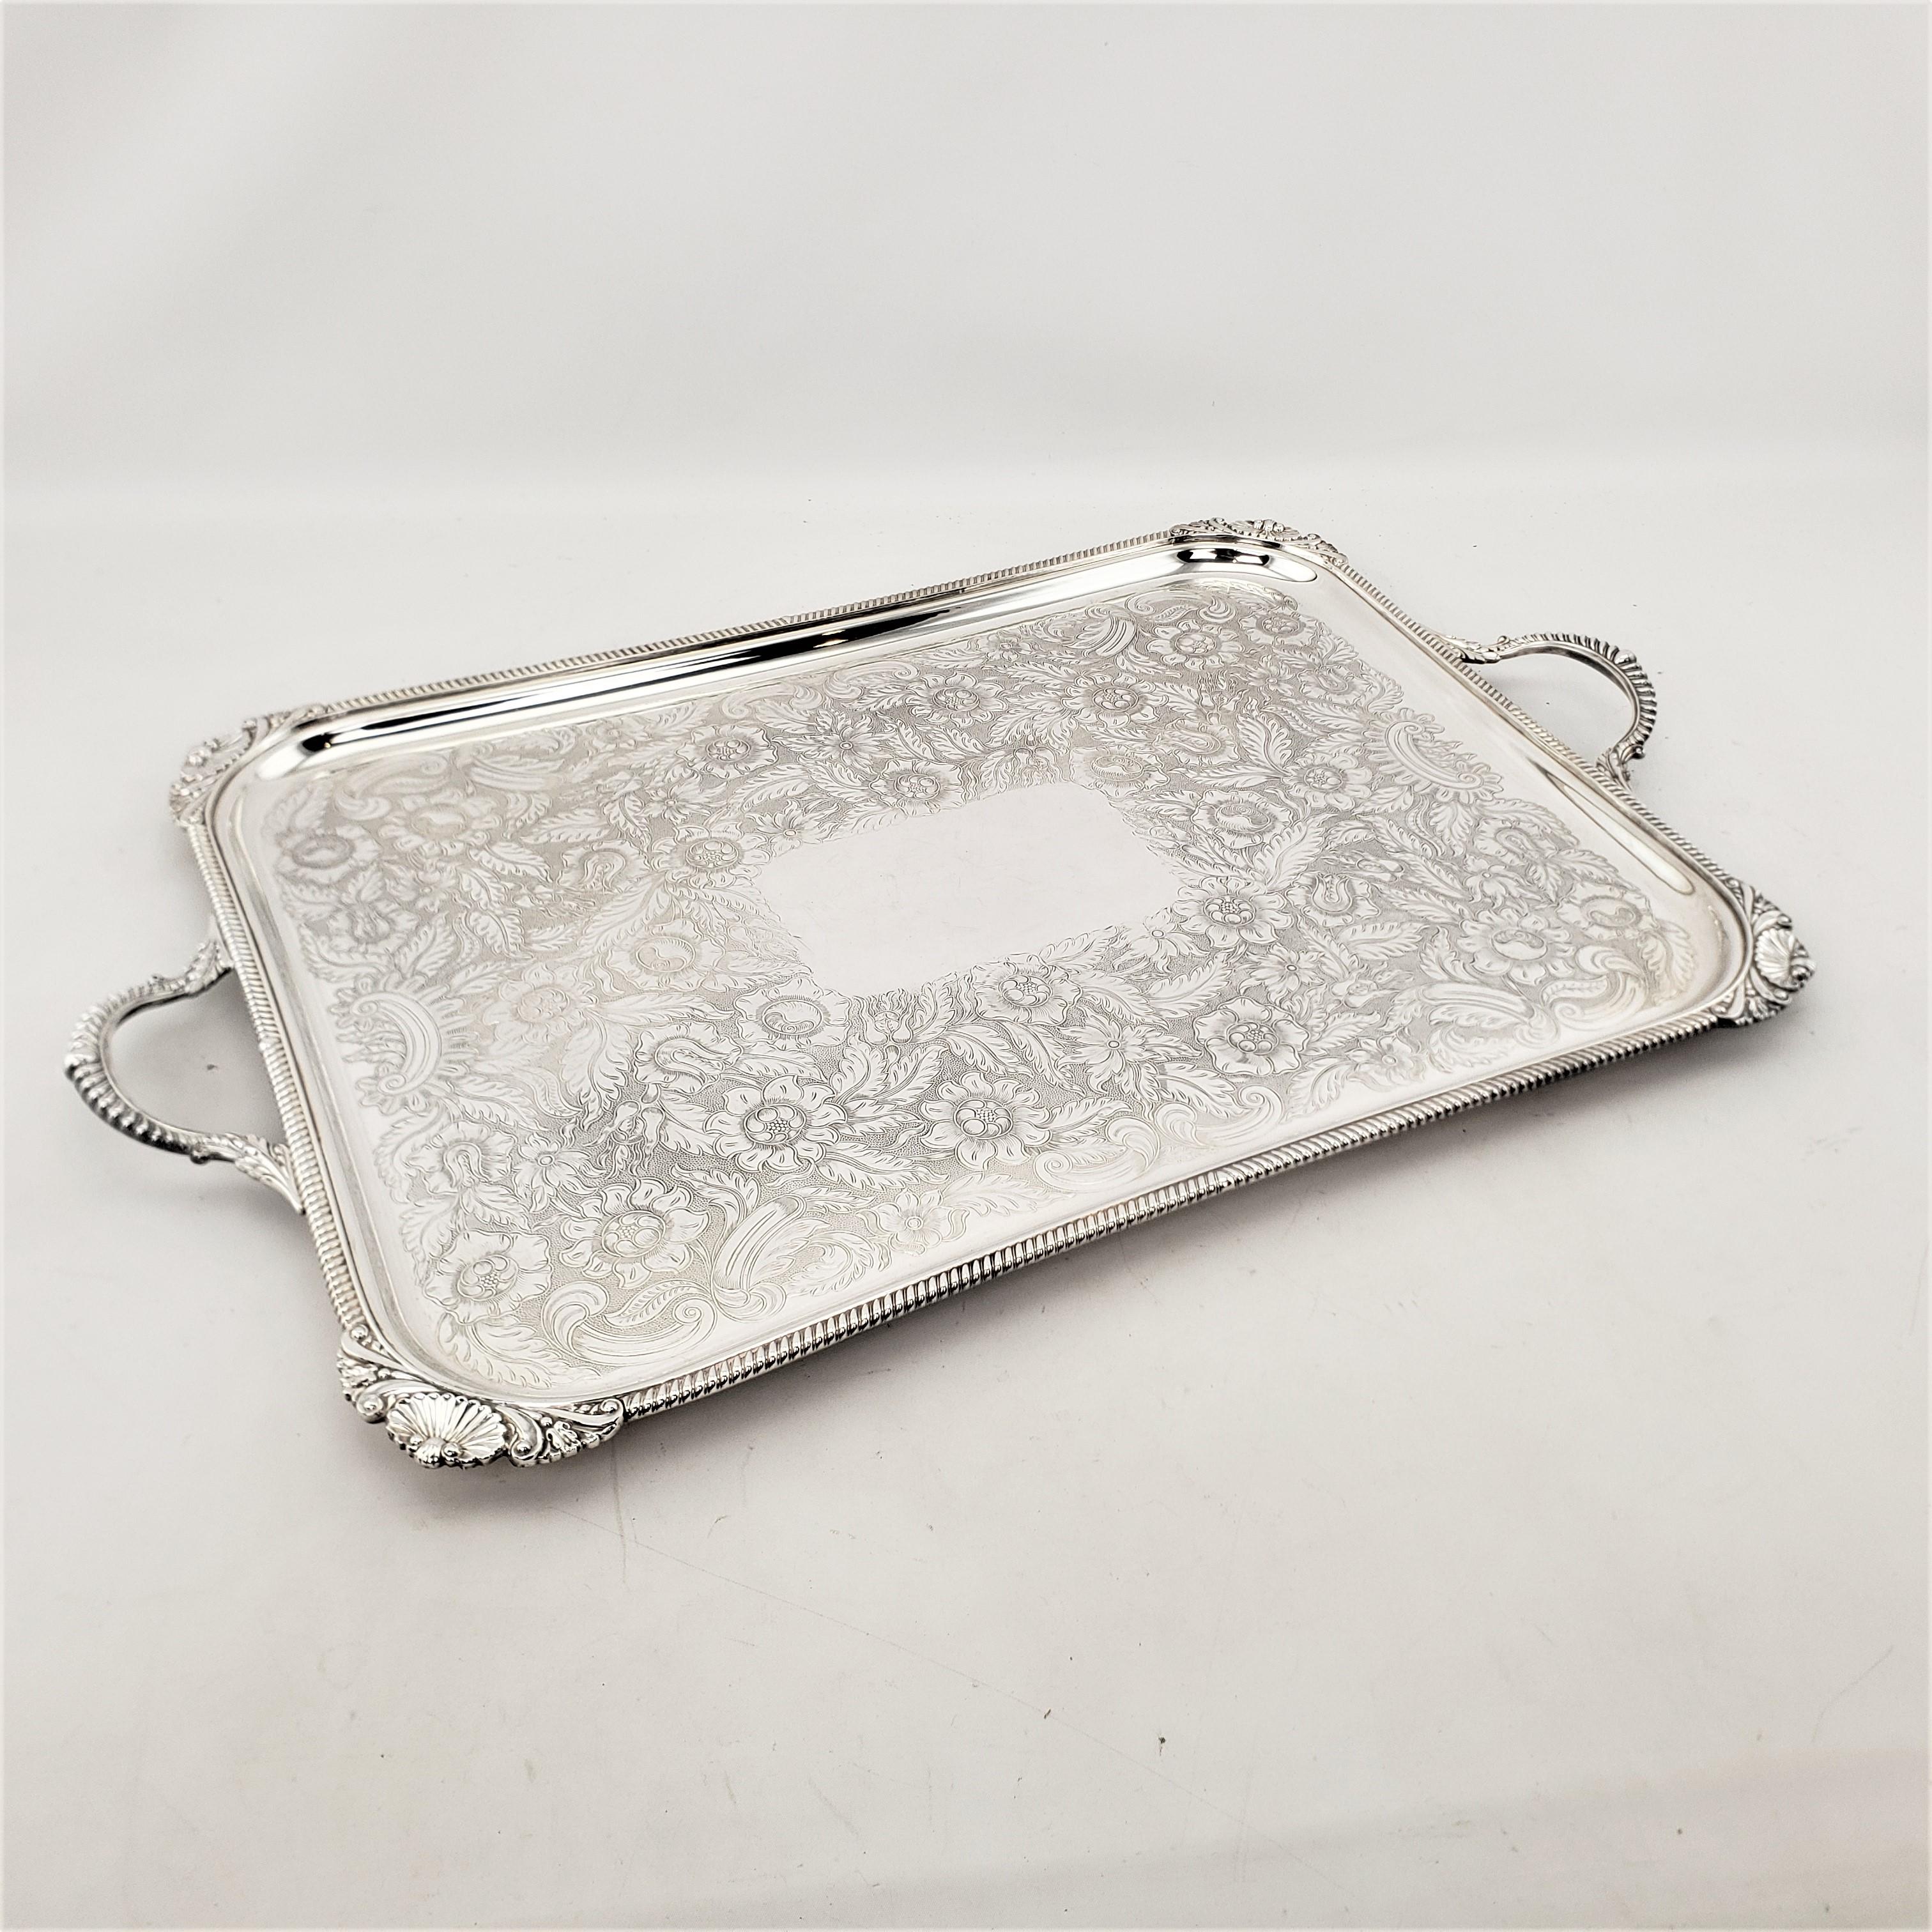 This silver plated serving tray was made for the renowned Birks department store chain, most likely by a maker from the United States in approximately 1920 in a Victorian style. The serving tray is rectangular in shape with a rope styled edge and